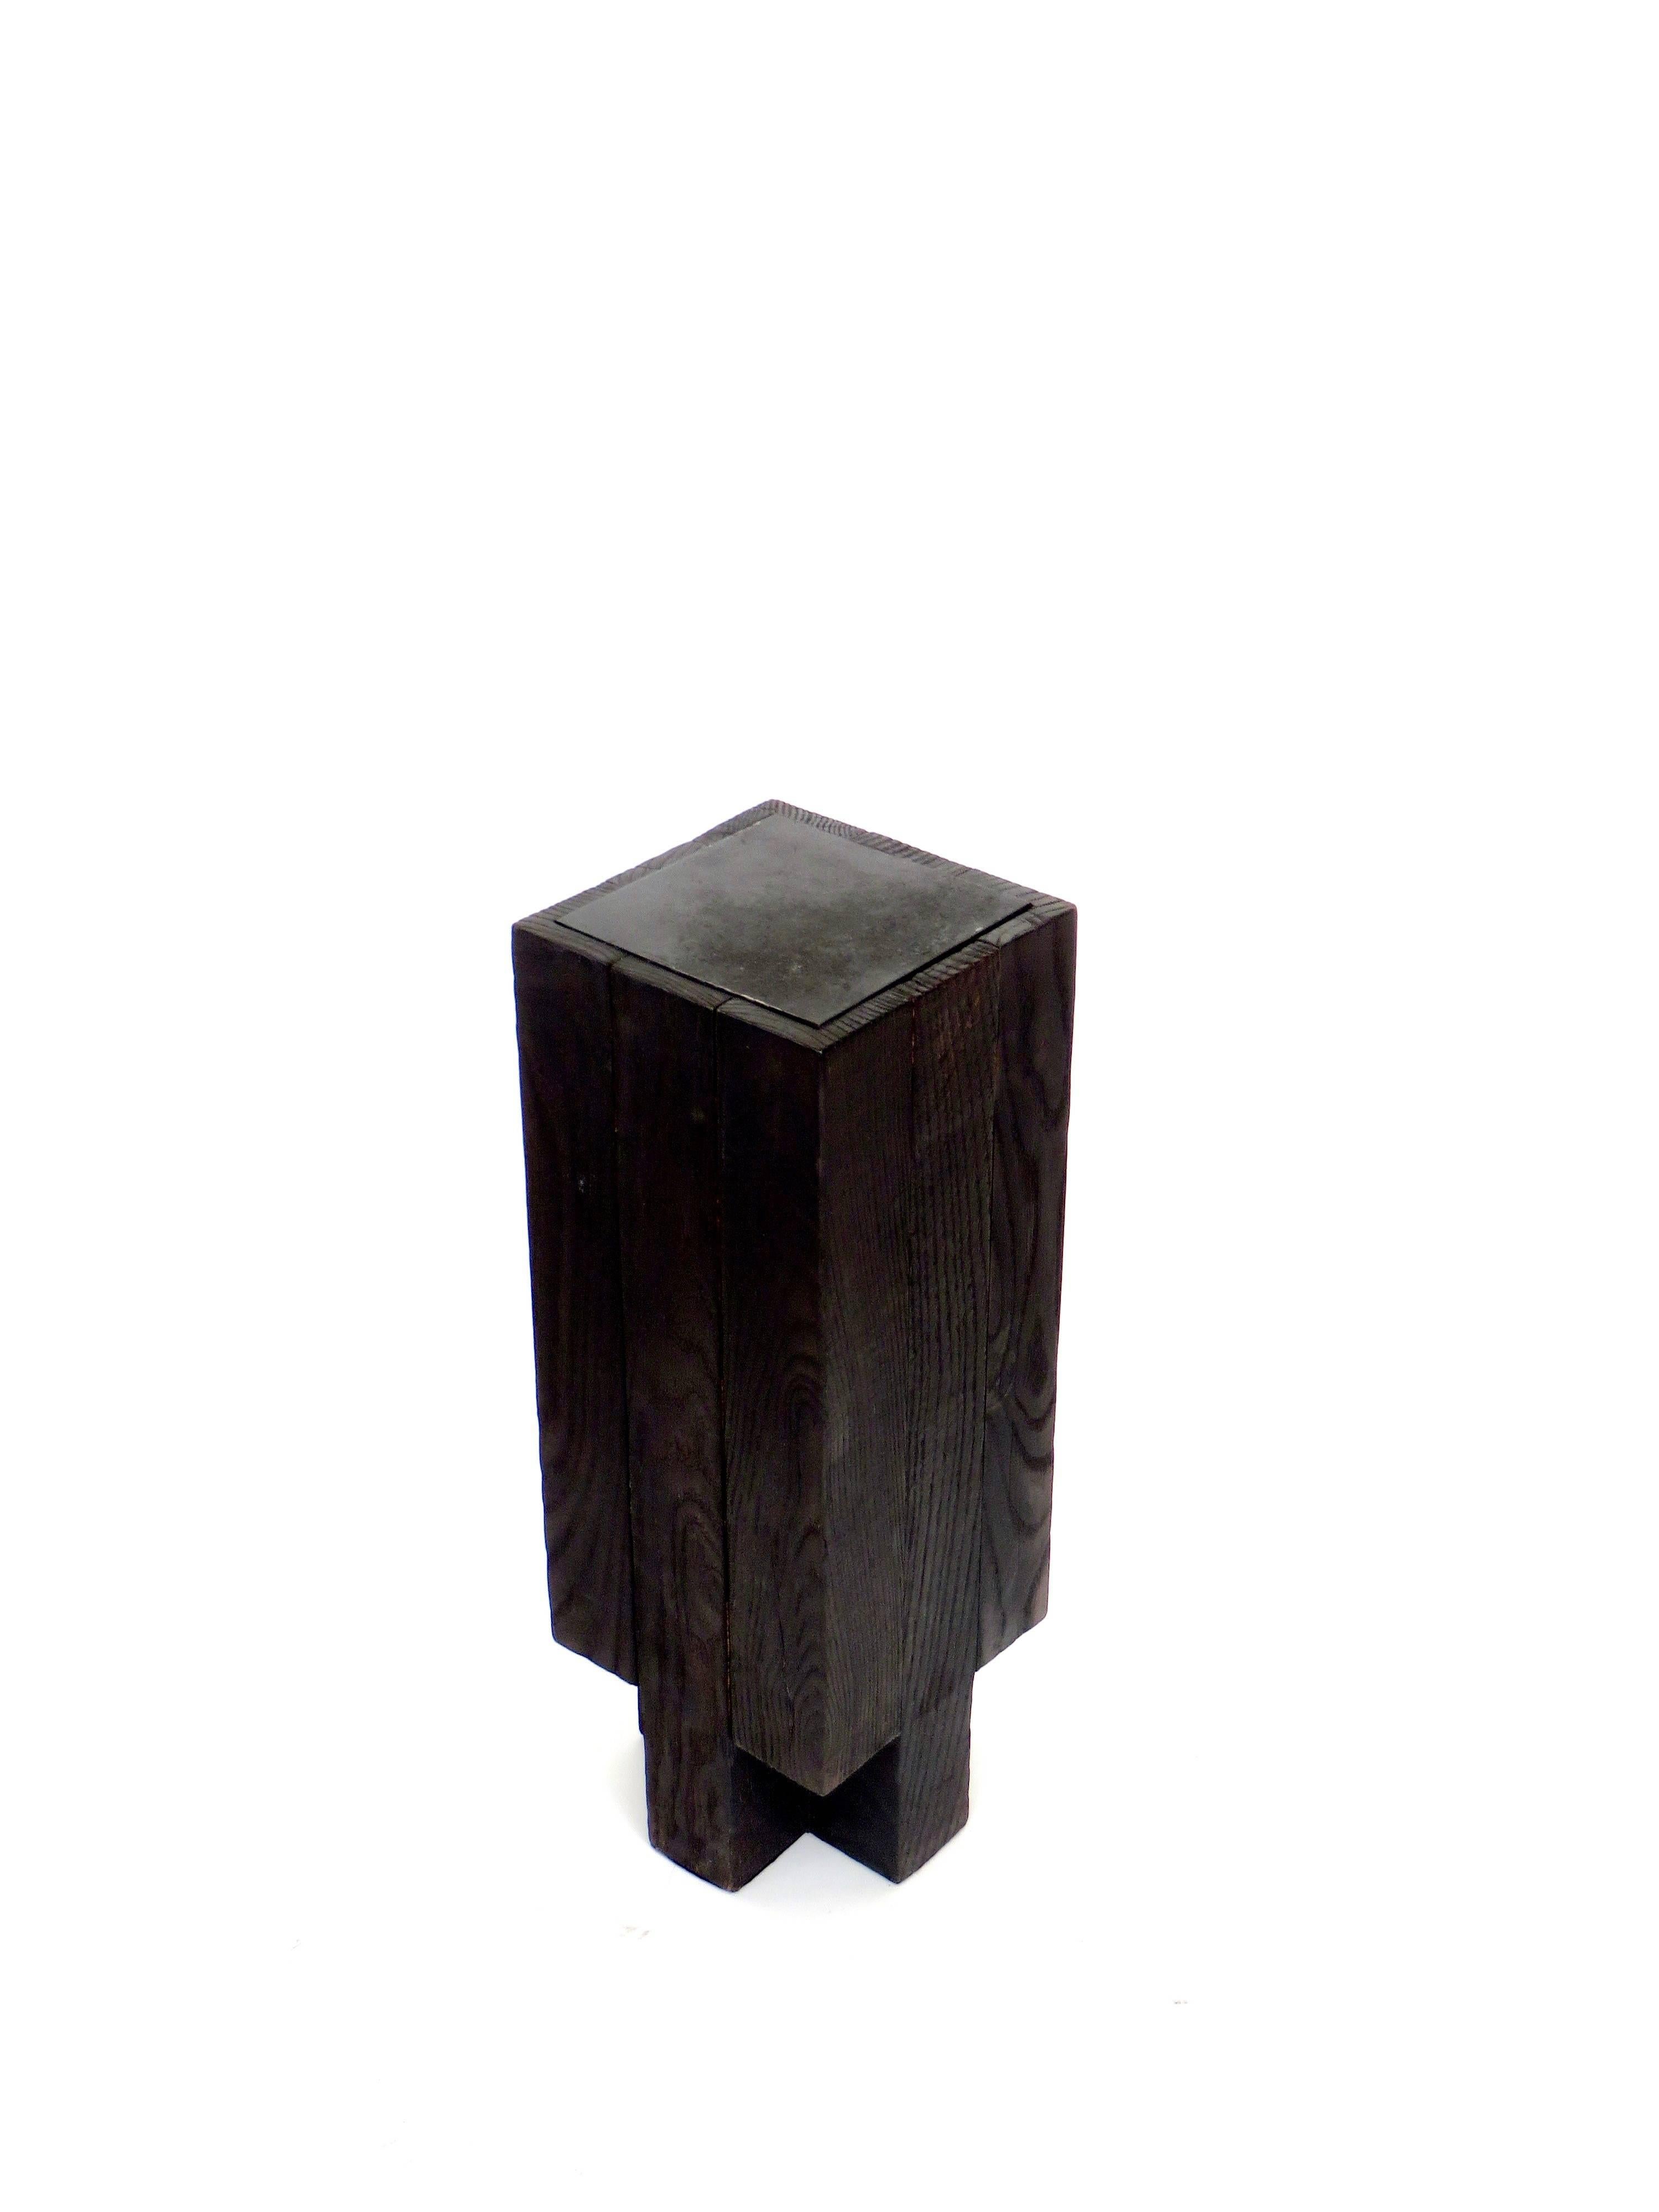 Contemporary Arno Declercq Black Belgian Oak Wood and Burned Steel Cross Stool or Side Table 